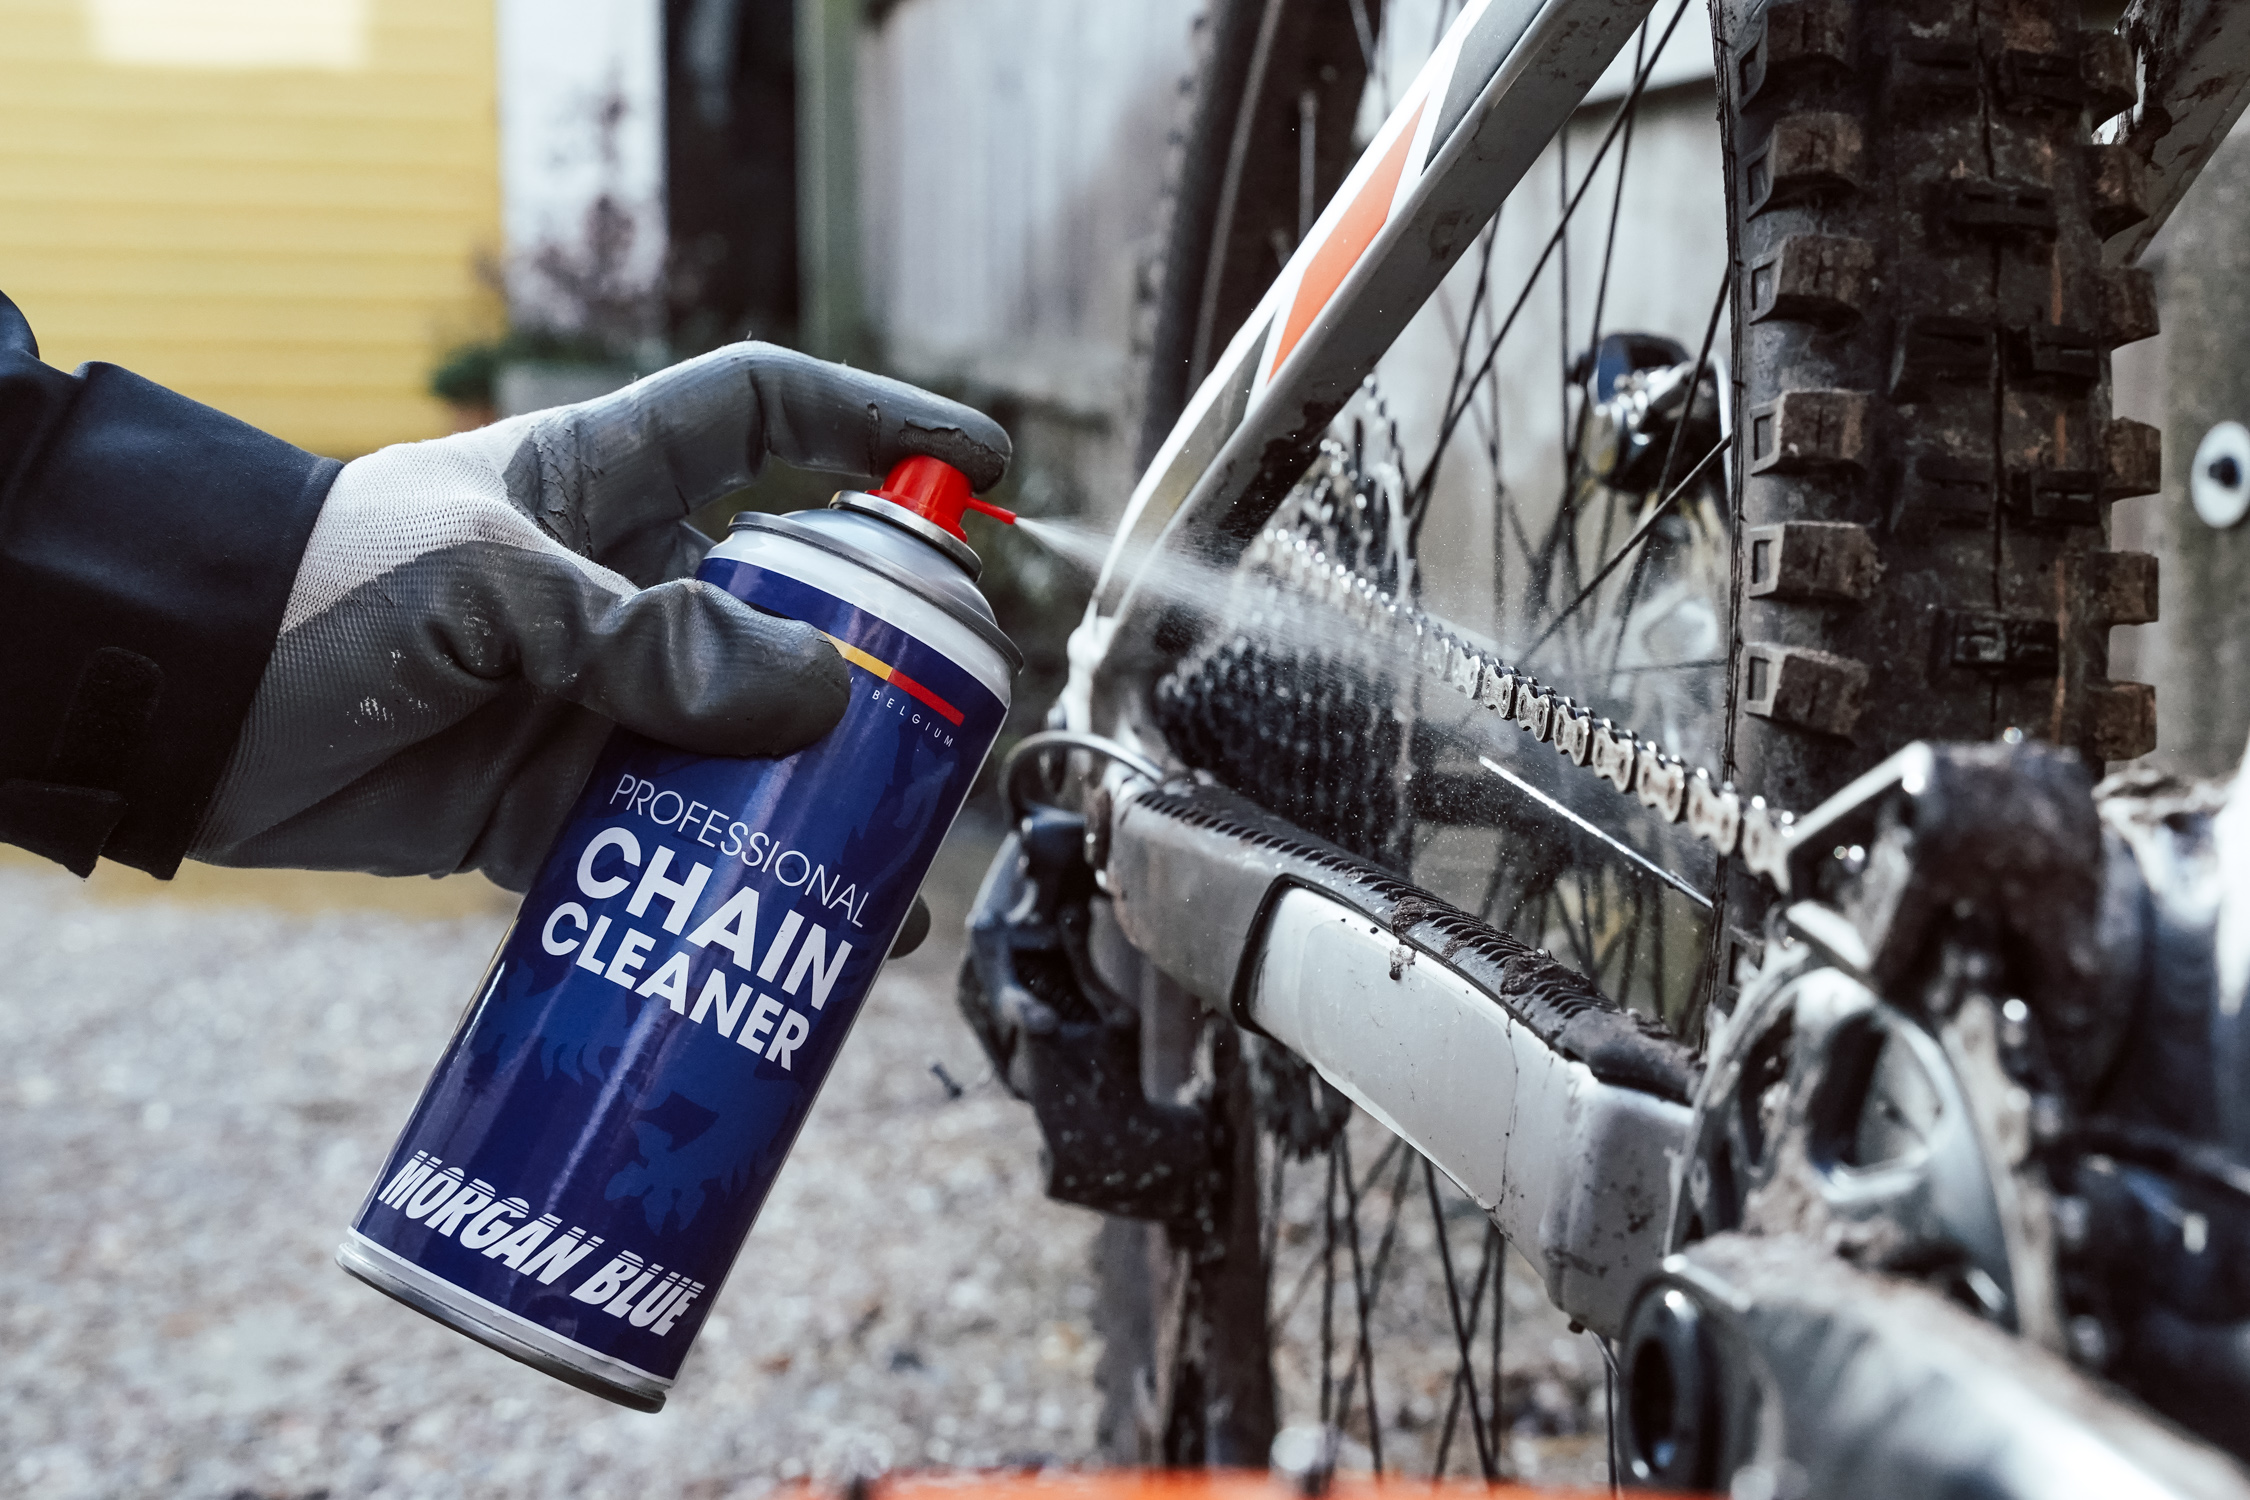 How to clean your mountain bike - Morgan Blue Chain Cleaner